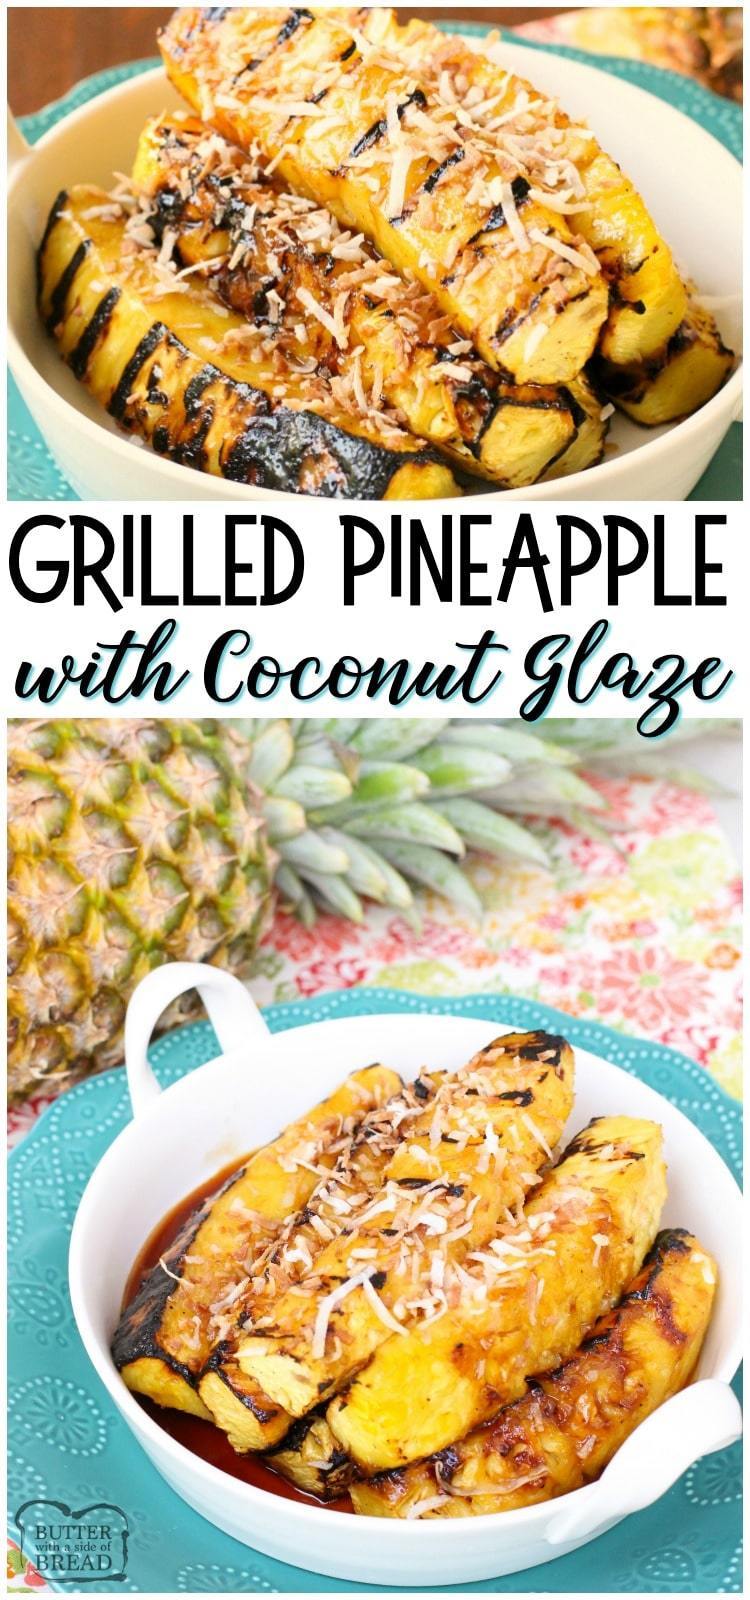 Grilled Pineapple with Coconut glaze is a fantastic side dish or dessert! Made easy with coconut, brown sugar and fresh pineapple, this is the best grilled pineapple I've tasted! #pineapple #grilling #coconut #recipe from BUTTER WITH A SIDE OF BREAD